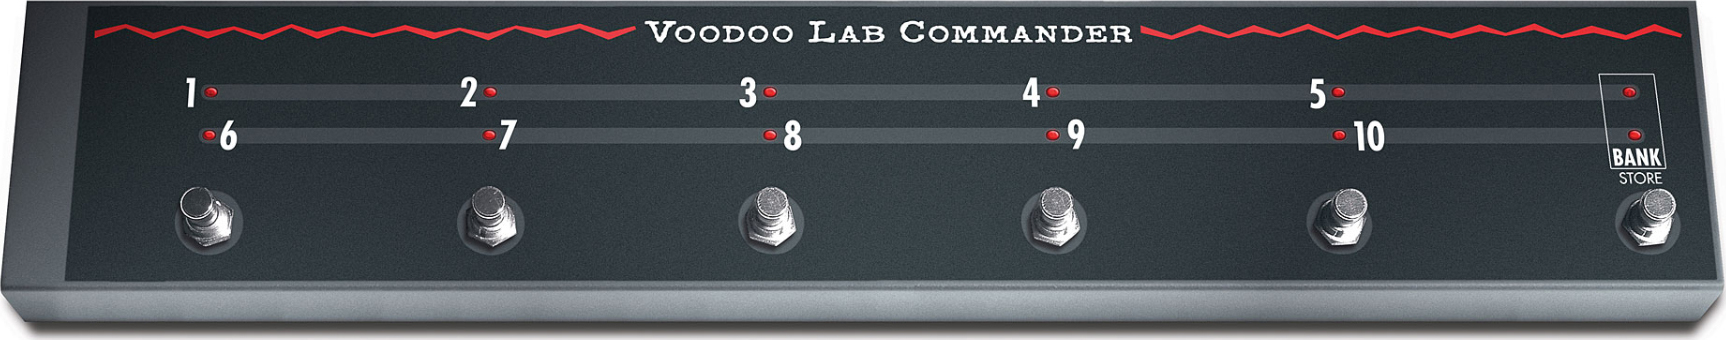 Voodoo Lab Commander Effects & Amp Switching System - Footswitch & Commande Divers - Main picture